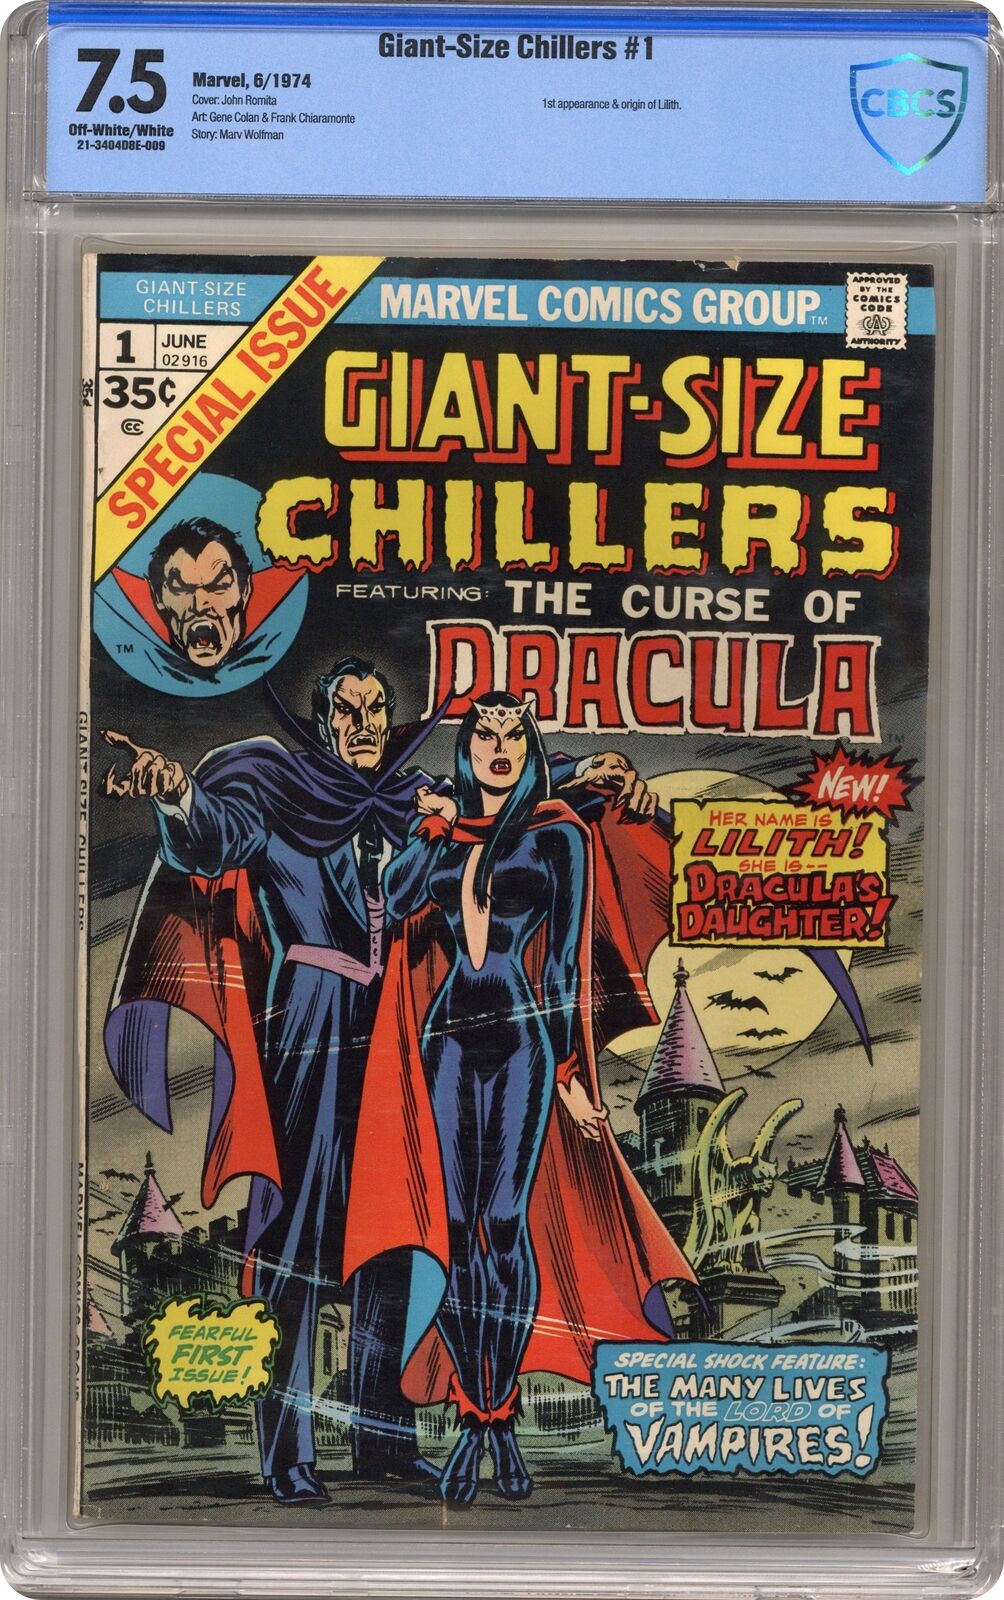 Giant Size Chillers Featuring Dracula #1 CBCS 7.5 1974 21-3404D8E-009